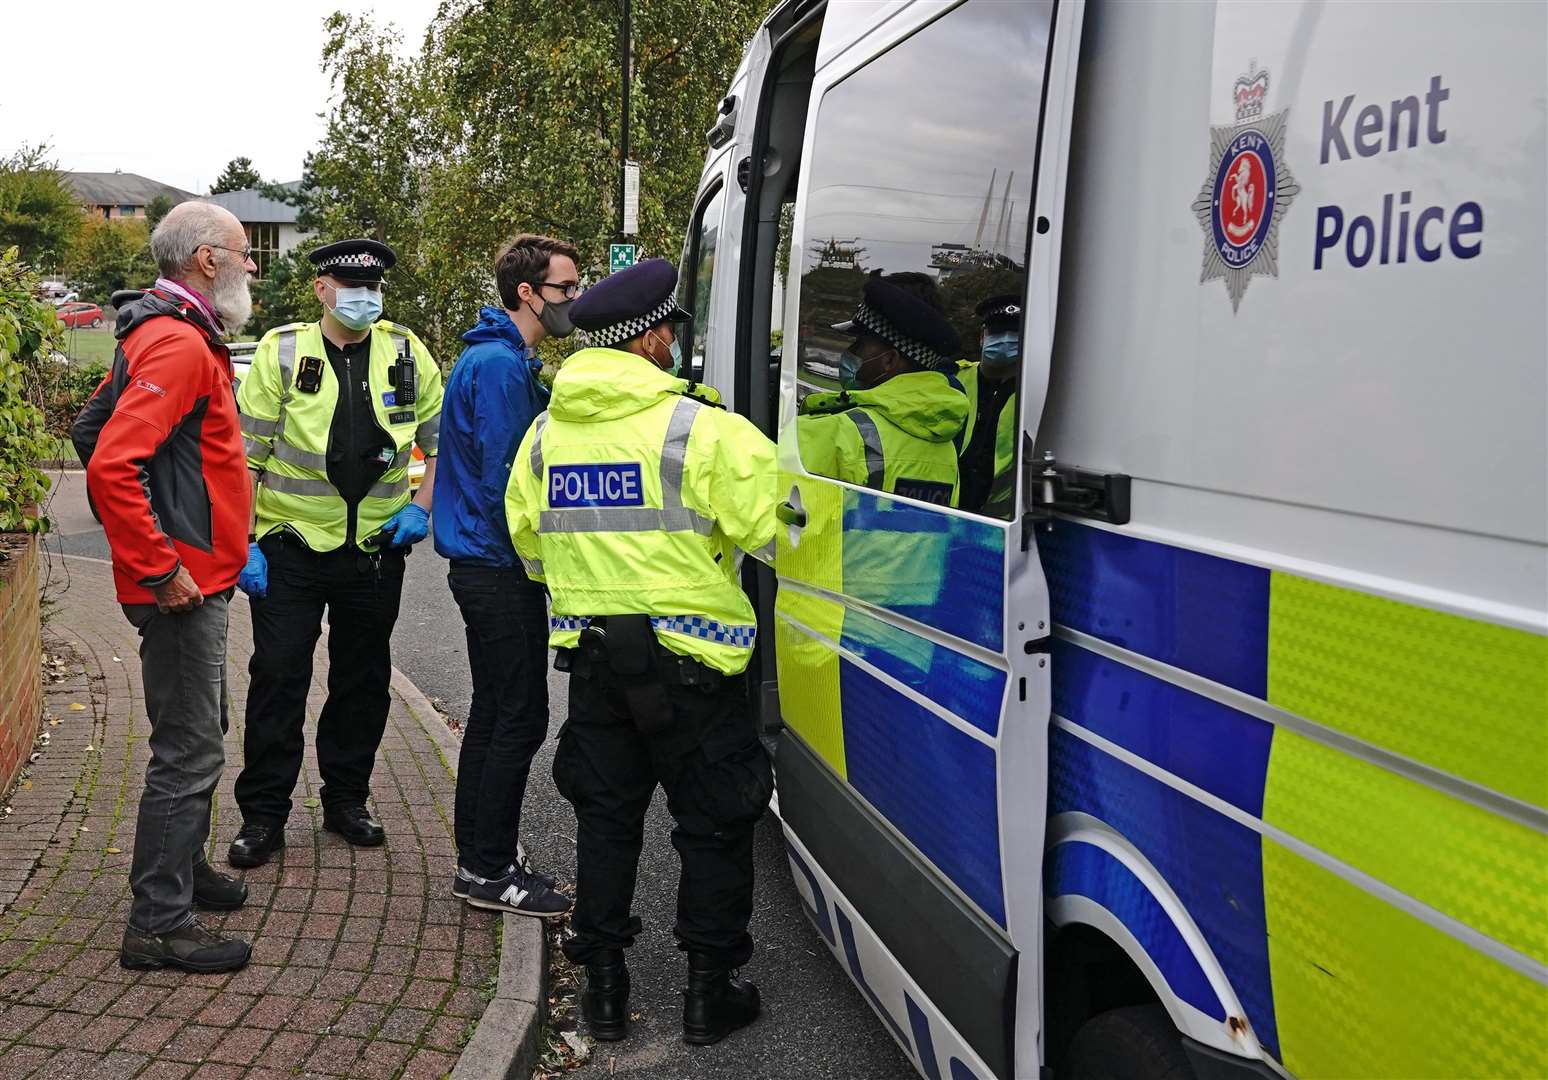 Protesters from Insulate Britain including Tony Hill (left) are arrested by police in the car park of the DoubleTree by Hilton Hotel Dartford Bridge in Dartford (Jonathan Brady/PA)